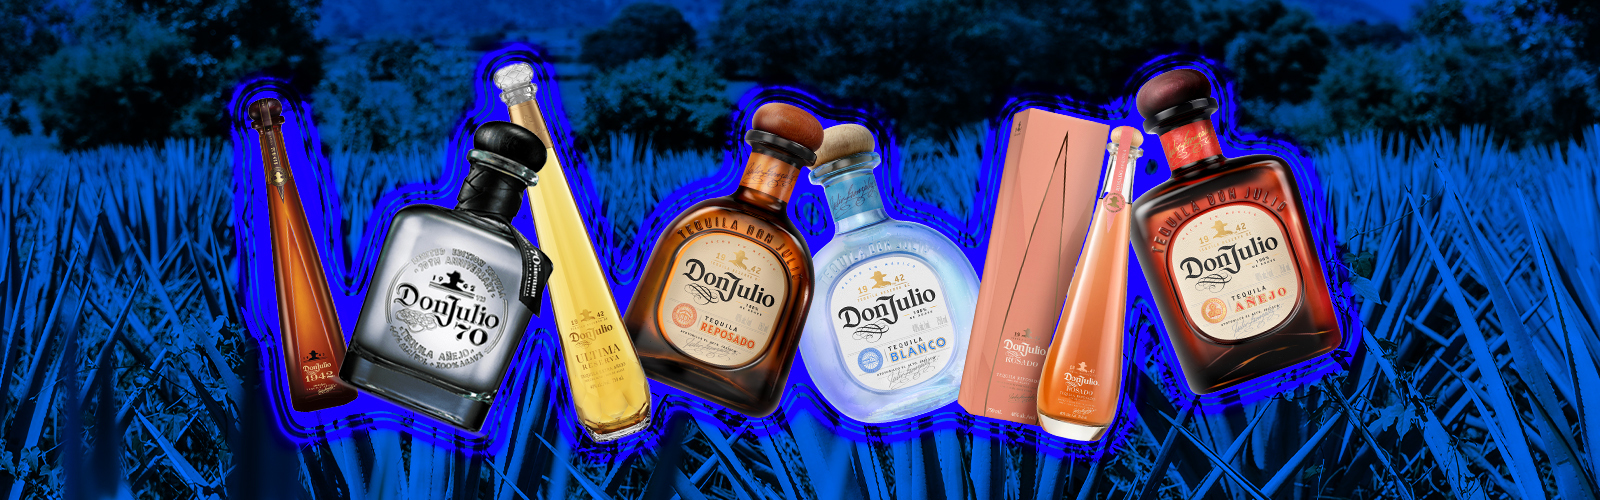 Full Don Julio Tequila Line